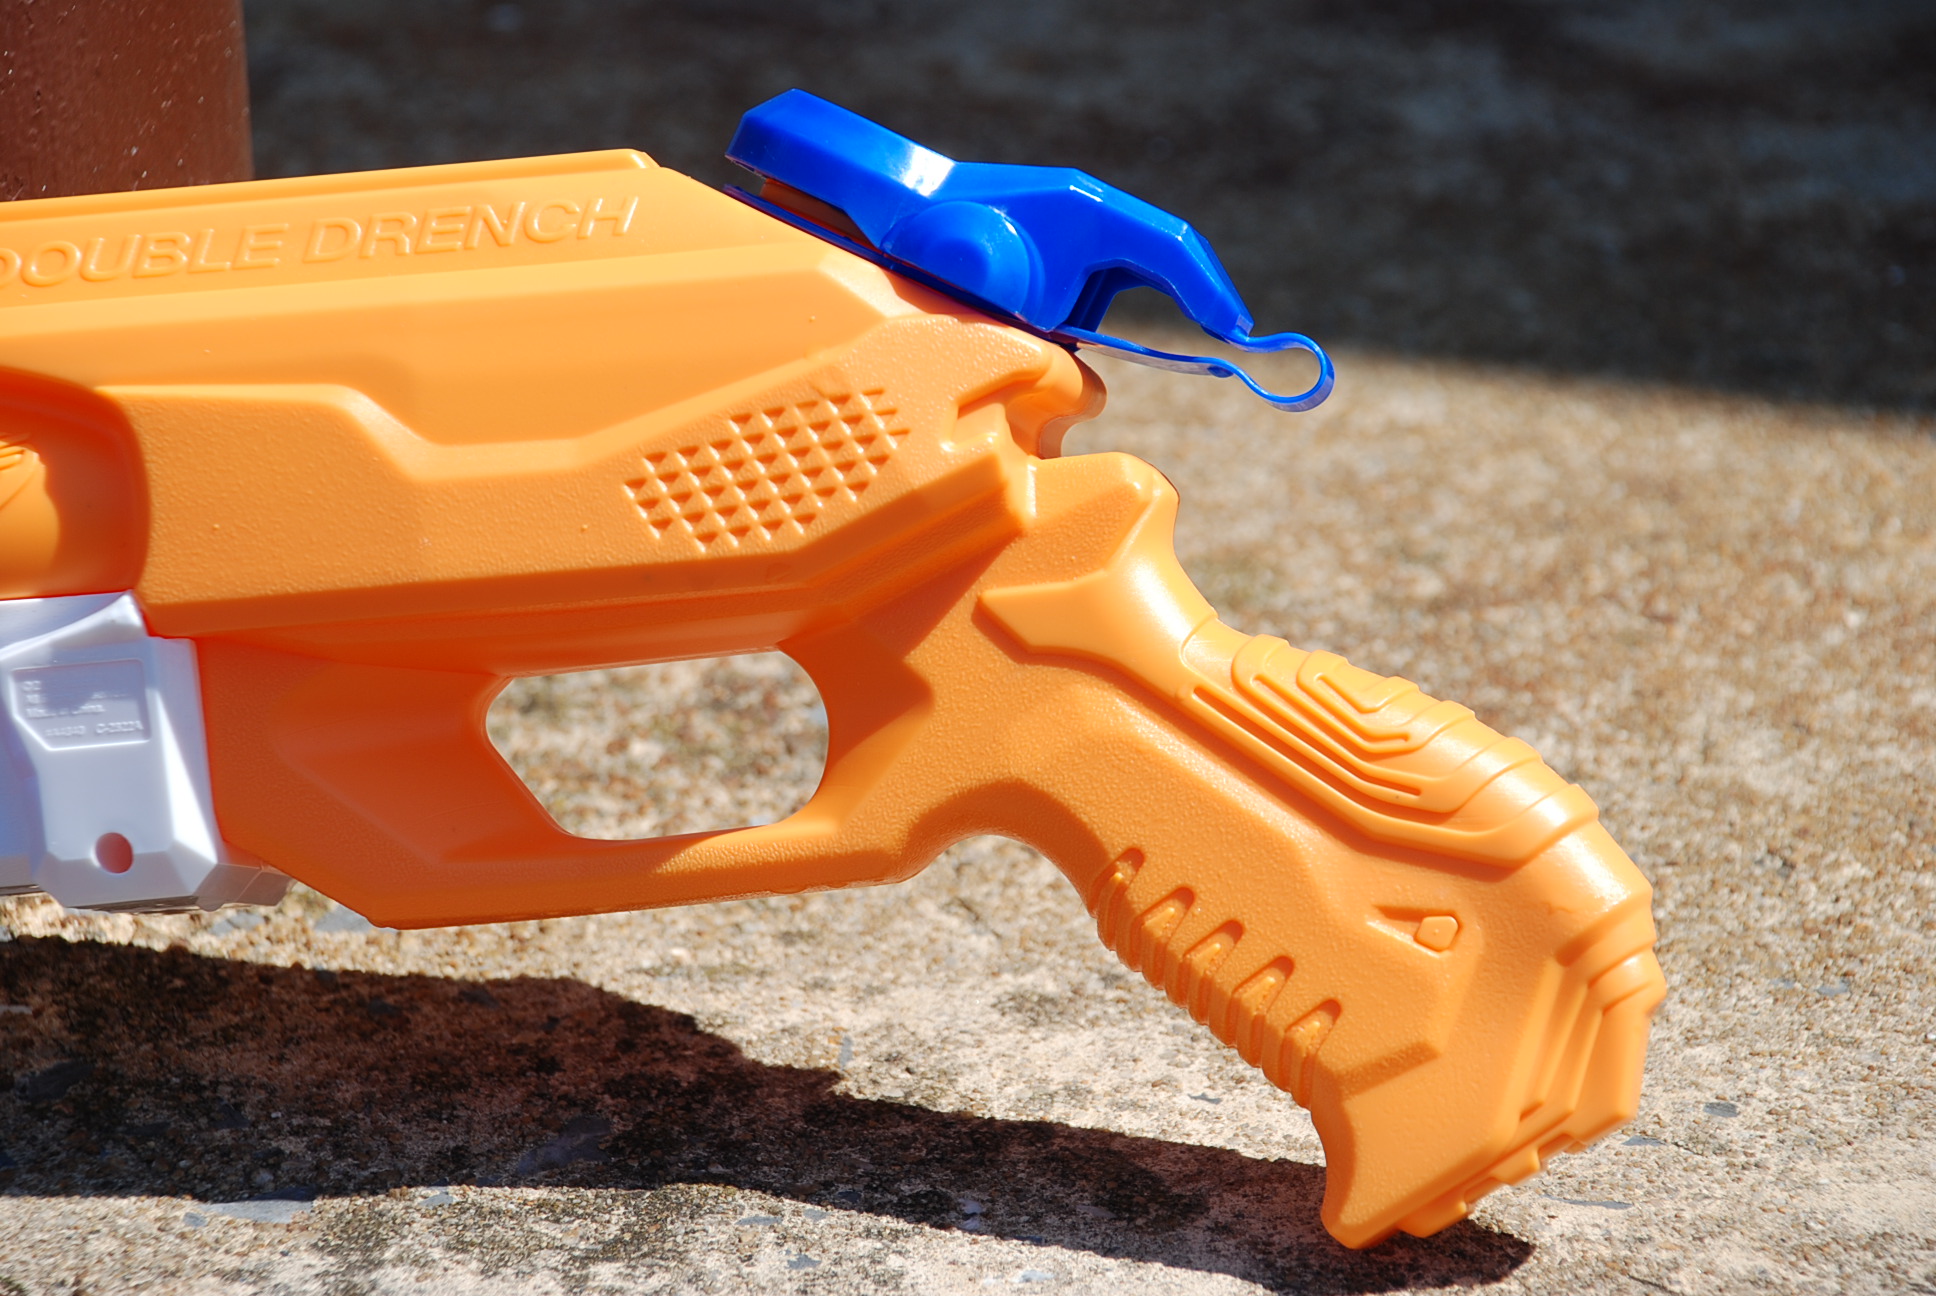 Double Drench Super Soaker from Nerf (11)